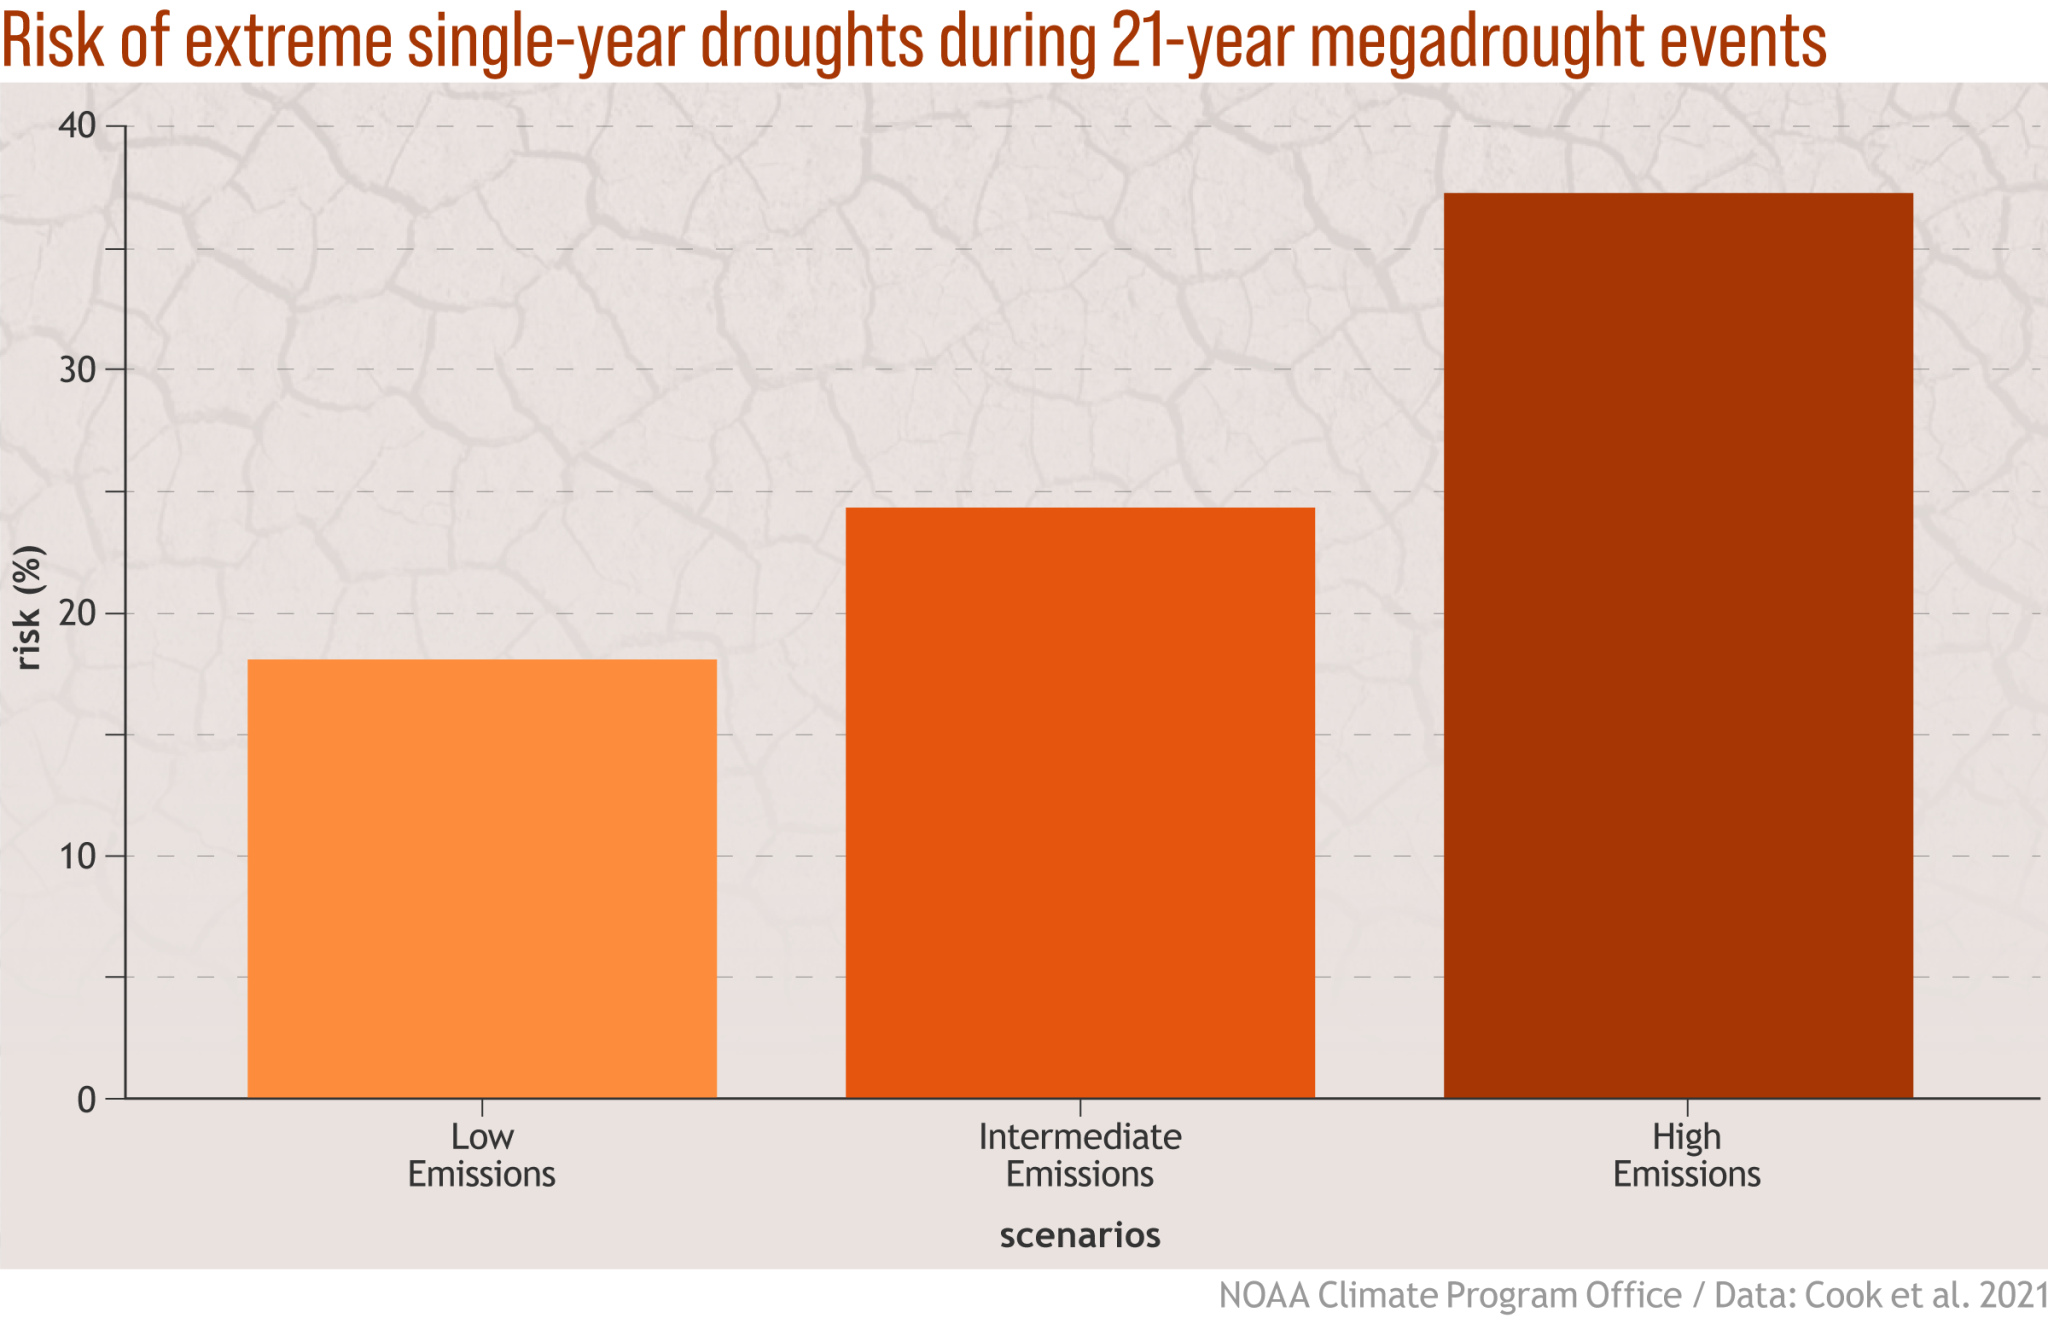 Figure showing the risk of intense single-year droughts embedded in multi-year droughts, which increases with increasingly severe greenhouse gas emissions scenarios. 